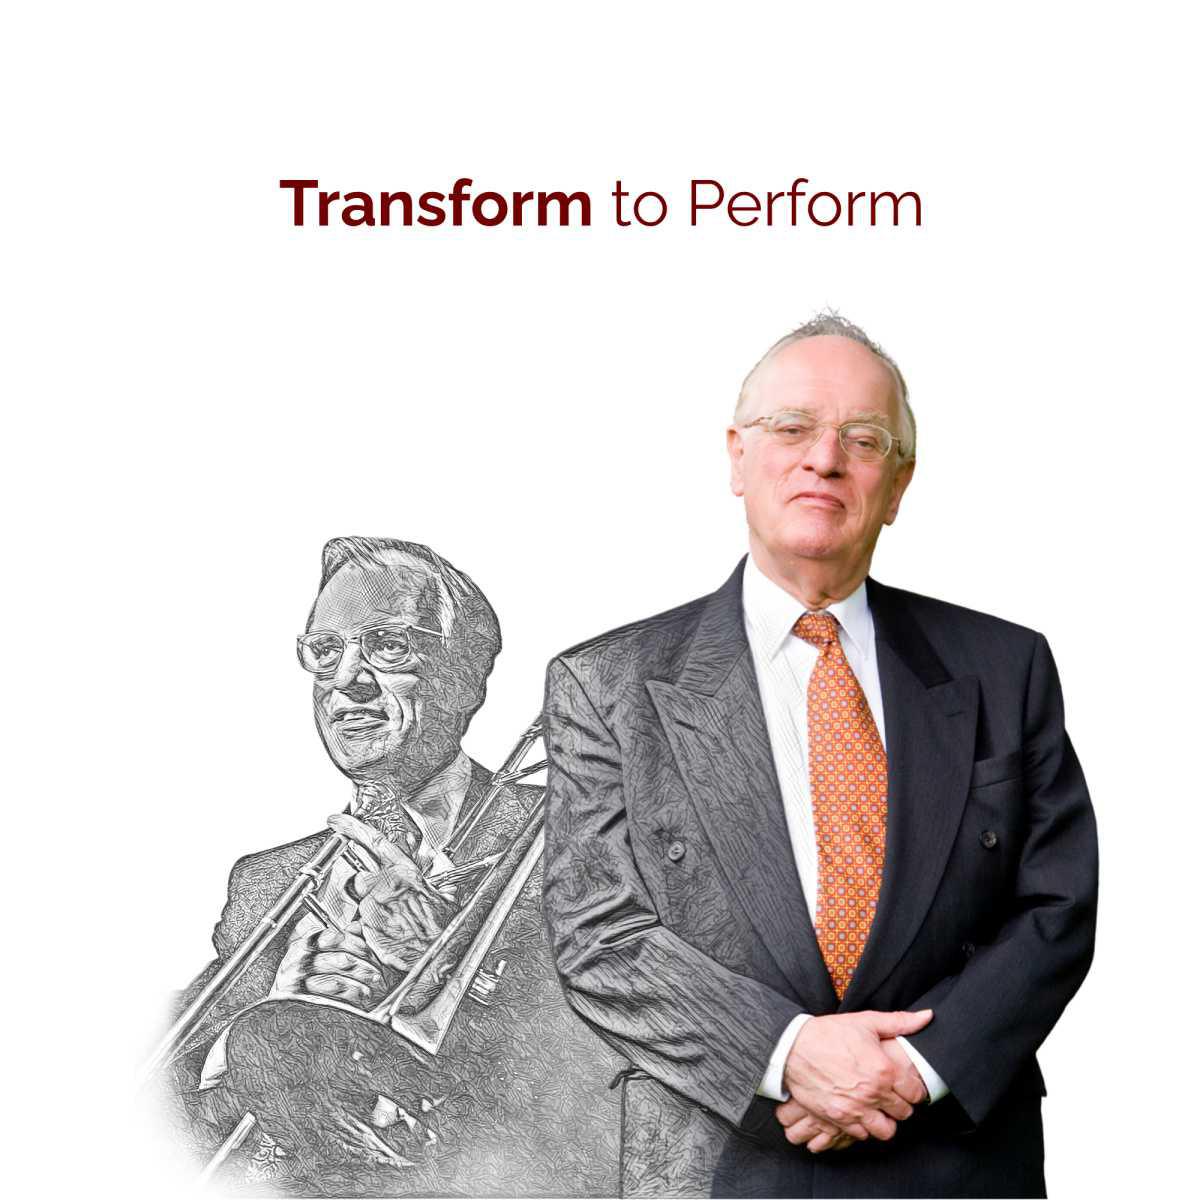 What does Transform to Perform Mean?